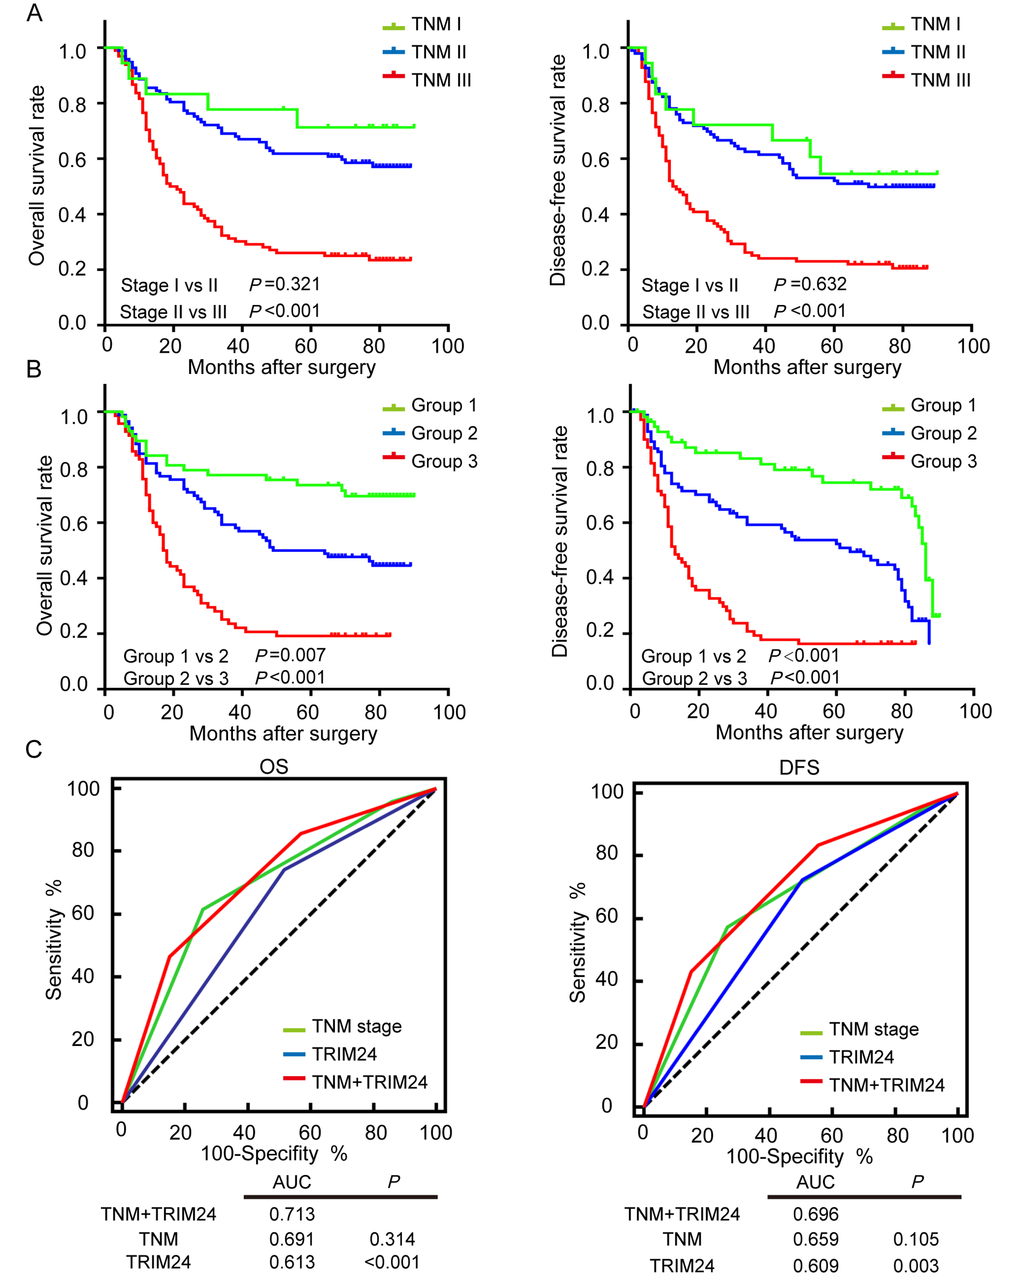 Survival prediction of ESCC patients by pTNM staging system and the combined TRIM24 protein expression with pTNM staging system. (A) OS (left panel) and DFS (right panel) outcomes of ESCC patients were predicted by pTNM staging system. (B) OS and DFS outcomes of ESCC patients were predicted by the combined TRIM24 protein expression and pTNM staging system, which show that the combined risk model significantly improves survival prediction of pTNM staging system (Stage I vs II, P =0.321; Group I vs II, P =0.007). (C) Receiver operating characteristic (ROC) analysis compares the survival prediction of ESCC patients by pTNM staging system, TRIM24 protein expression and the combination of both. The result shows that the area under the curve (AUC) of the combined model is the largest among the three predictors, which demonstrates that predictive accuracy of the combined risk model is better than those of pTNM staging system and TRIM24 protein alone.